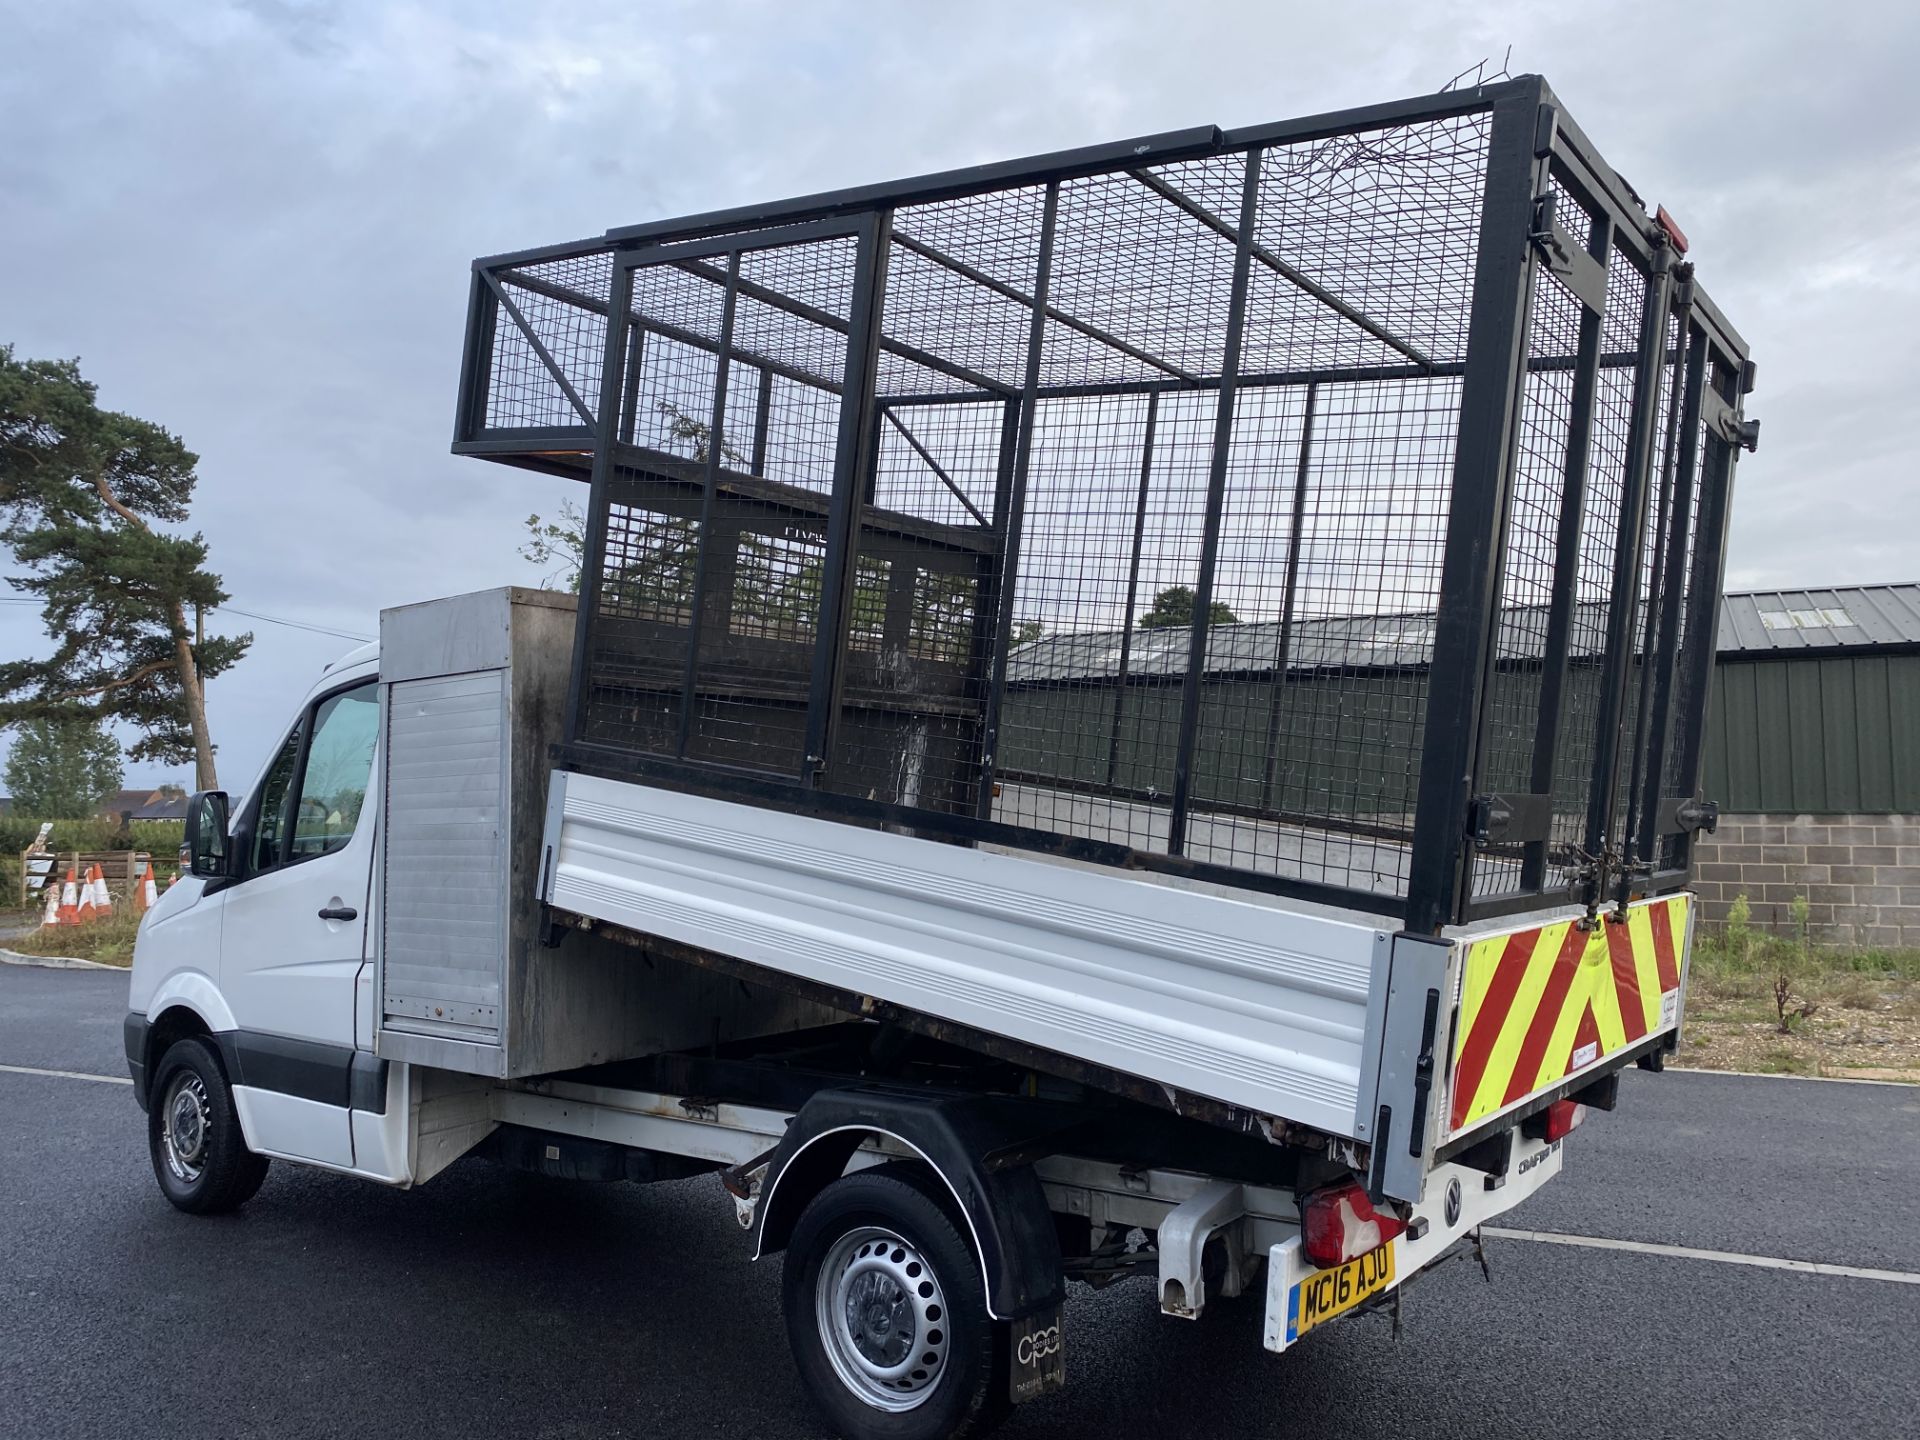 (On Sale) VOLKSWAGEN CRAFTER CR35 2.0TDI CAGED TIPPER TRUCK - 16 REG - ONLY 35K MILES - 1 OWNER - Image 5 of 8